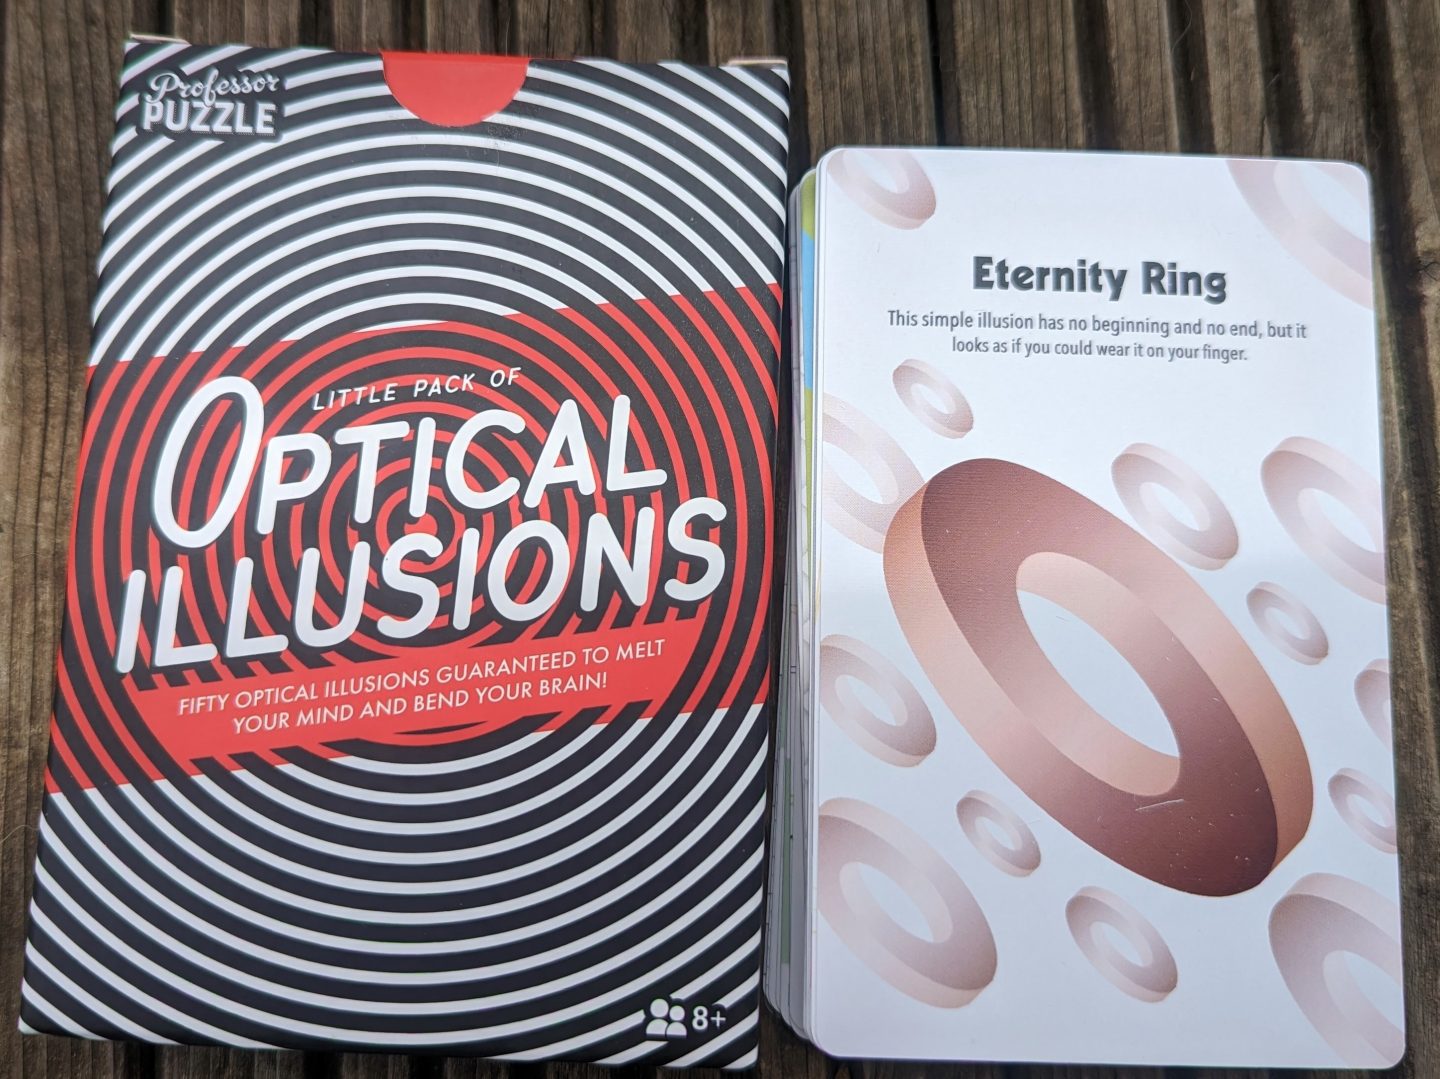 Optical illusions cards box and card next to it with an eternity ring optical illusion